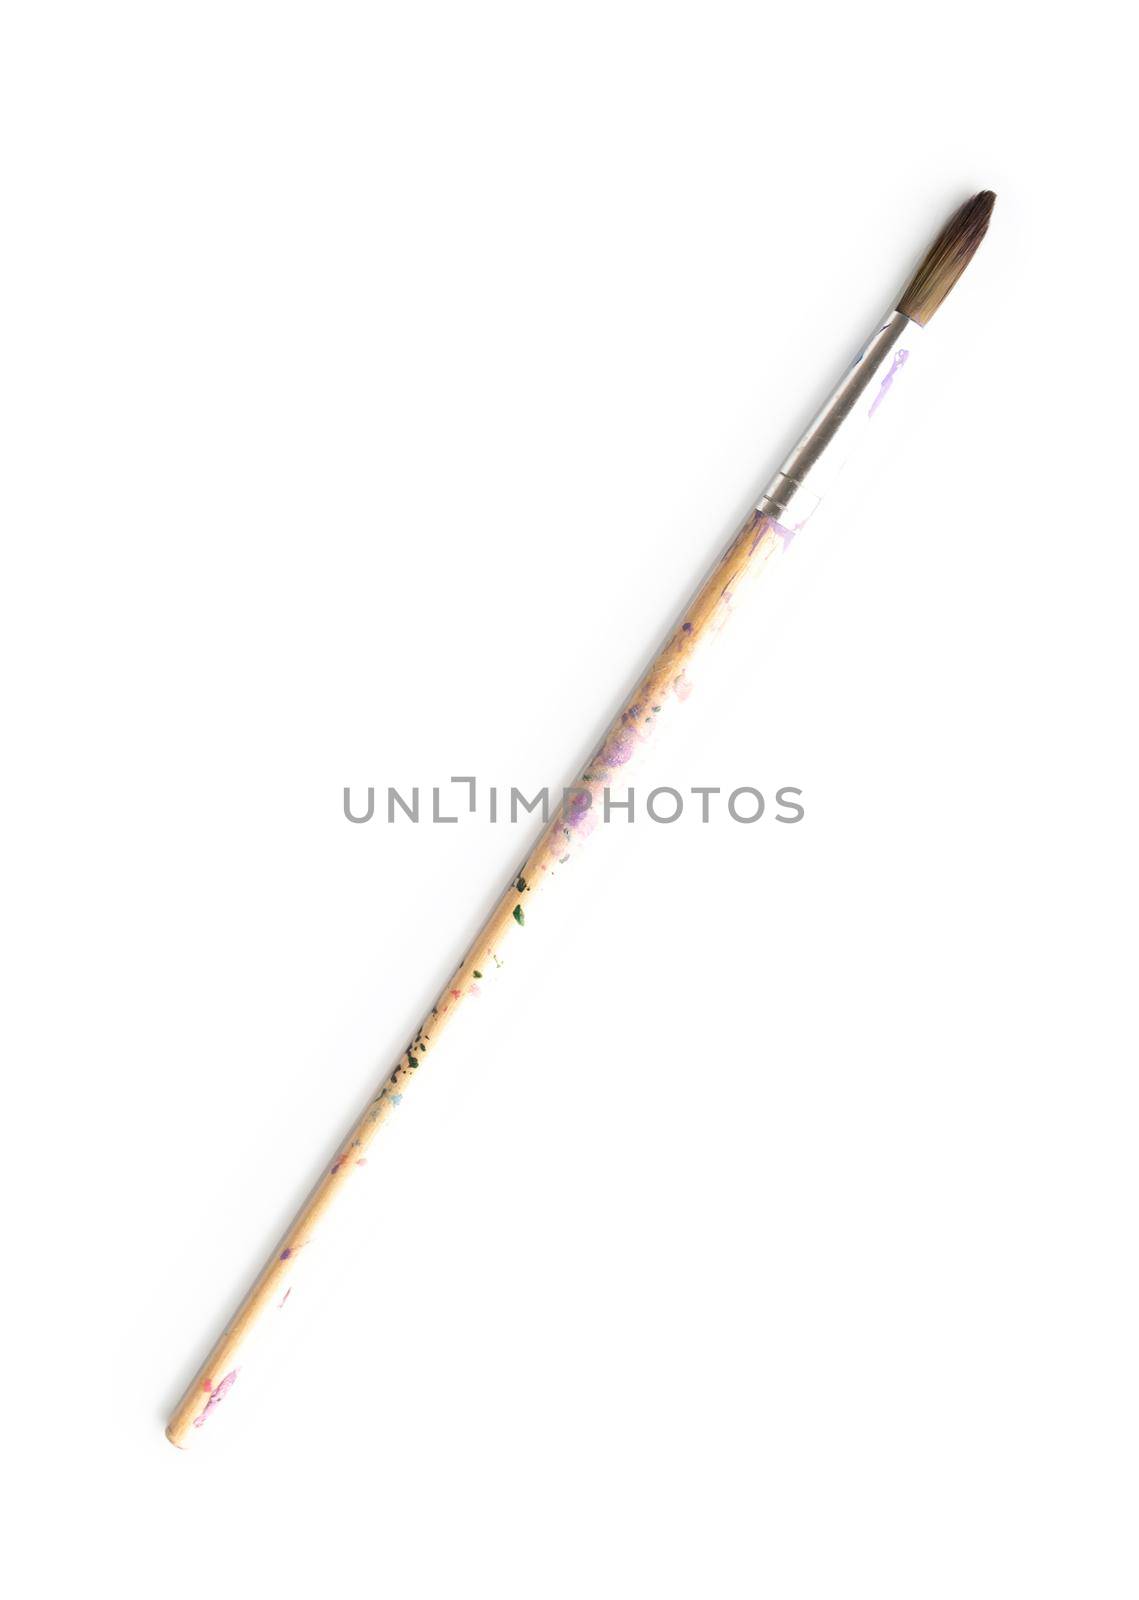 Stained this painting brush, made of hair, isolated on white background